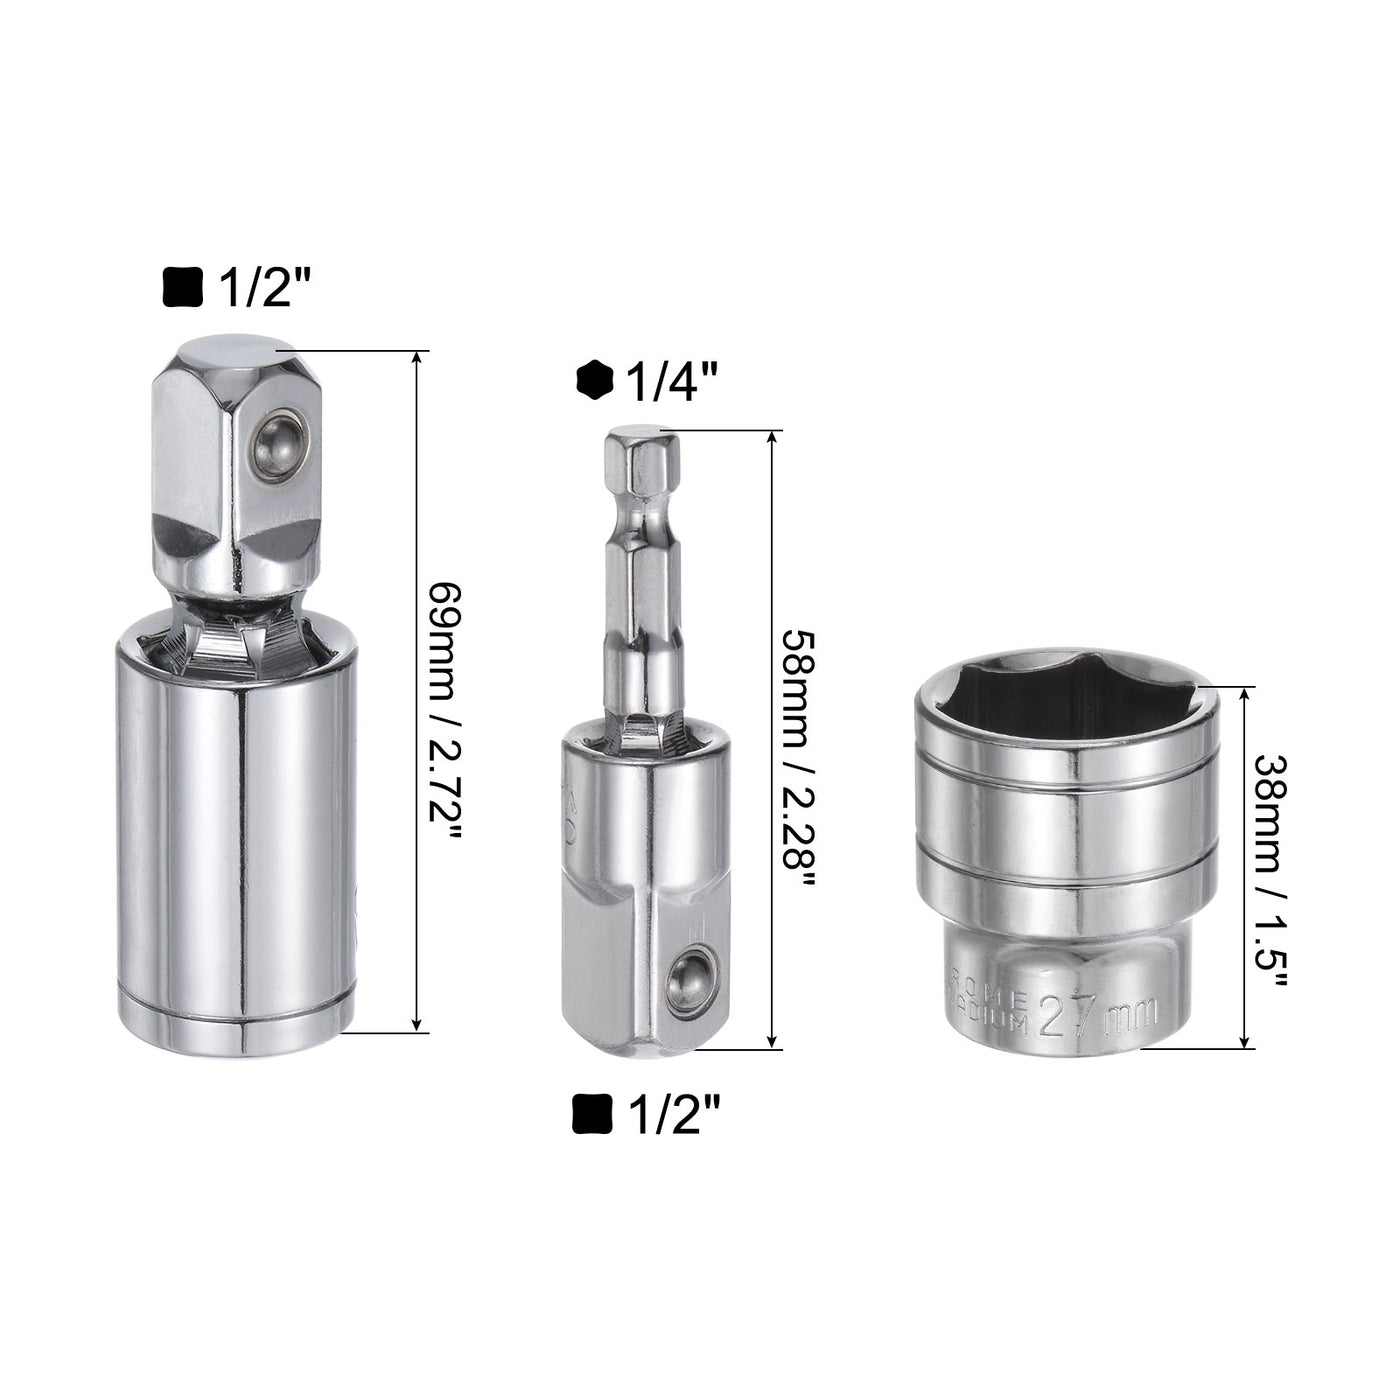 uxcell Uxcell 1/2" Drive 27mm Shallow Socket Swivel Joints Hex Shank Impact Driver Adaptor Set